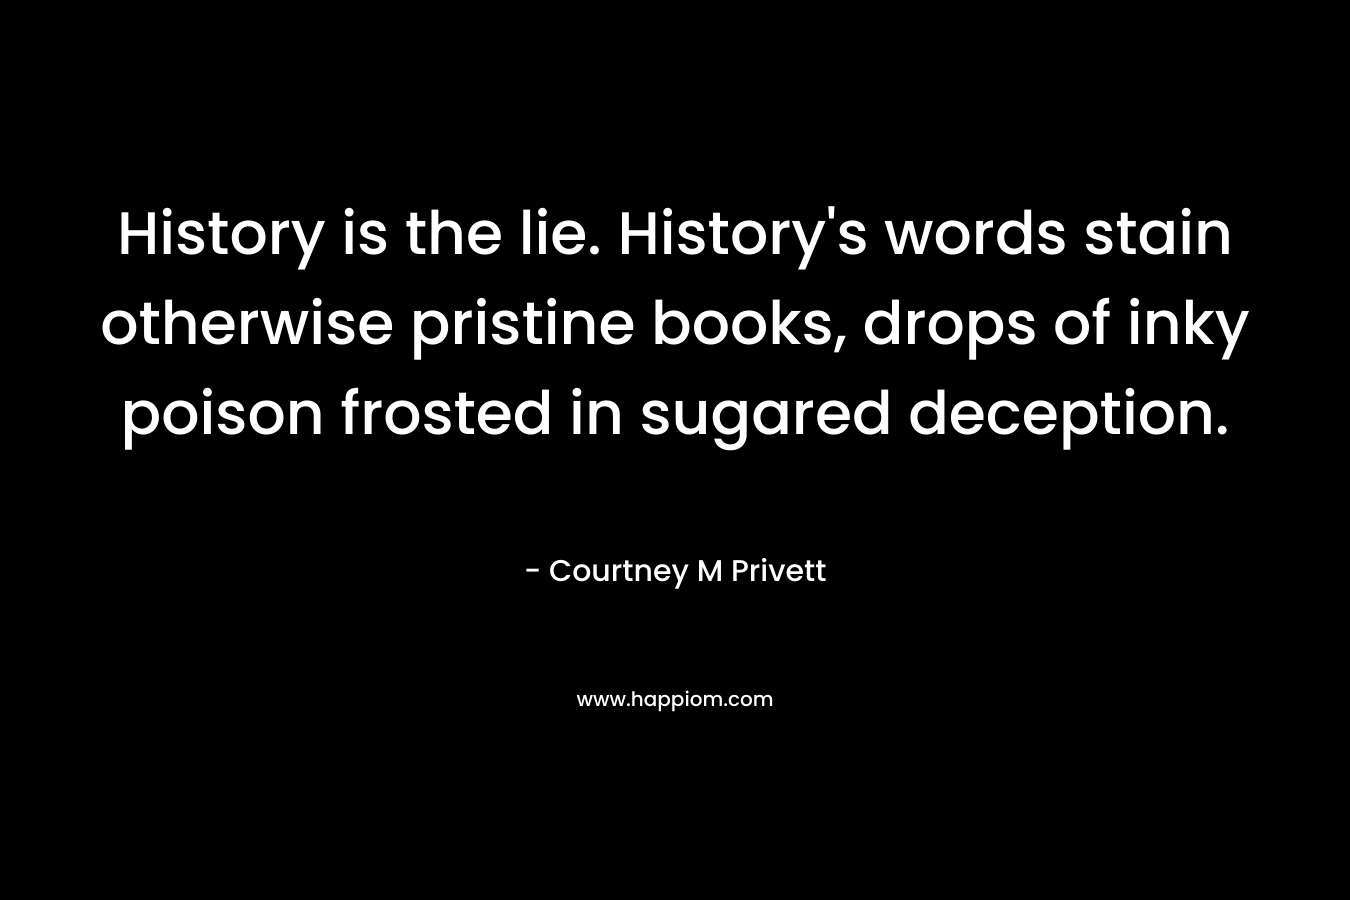 History is the lie. History’s words stain otherwise pristine books, drops of inky poison frosted in sugared deception. – Courtney M Privett